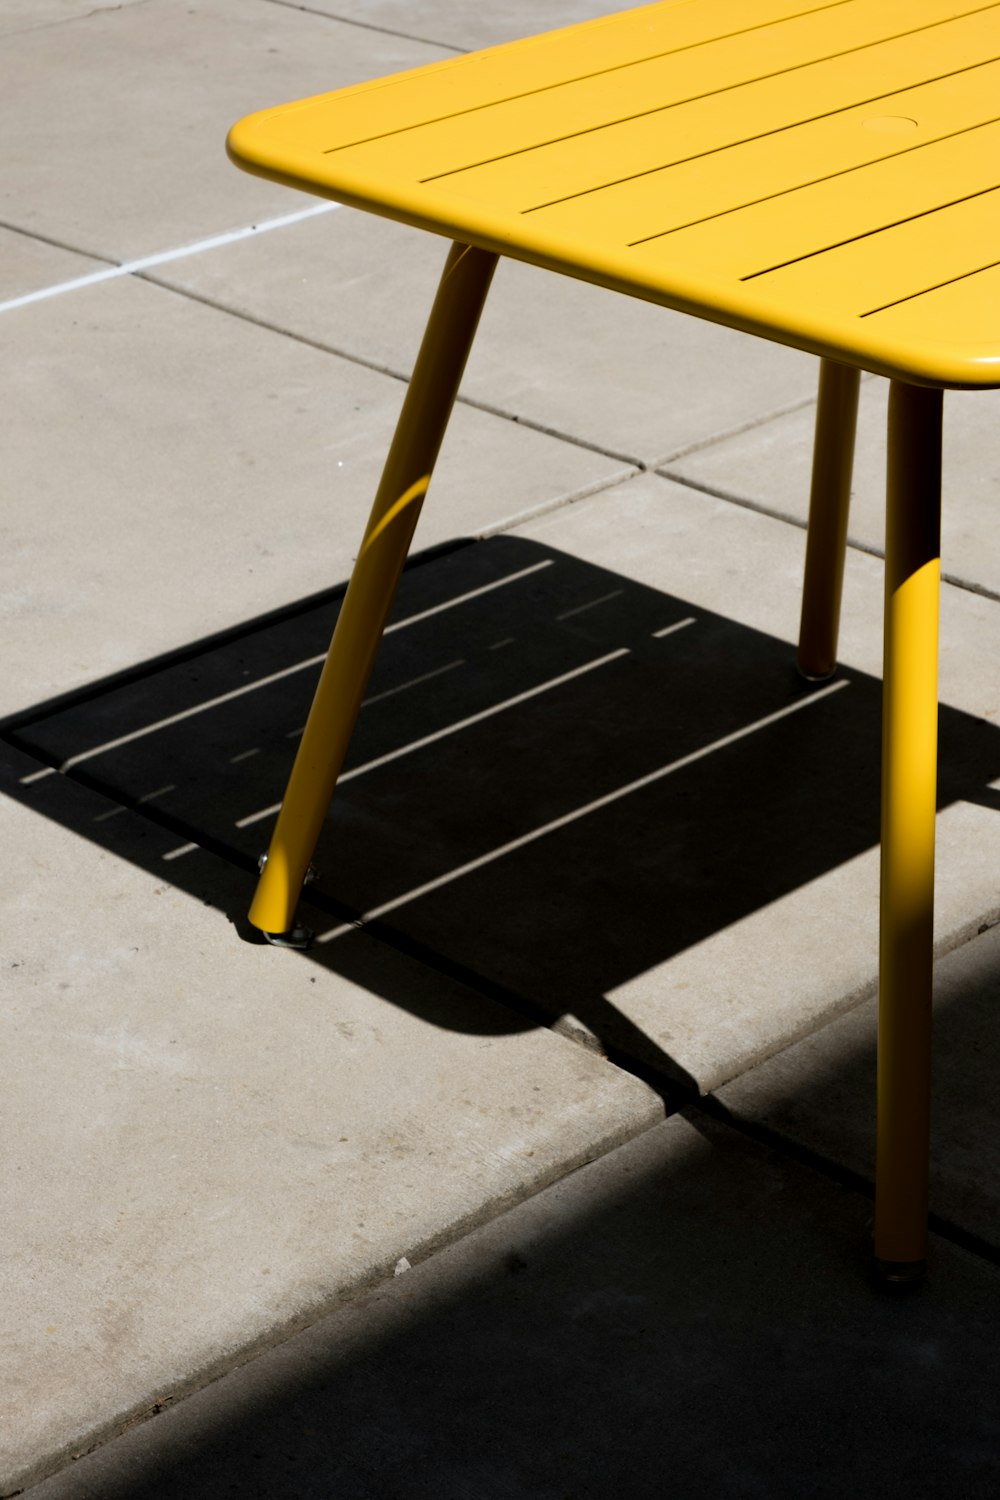 a yellow table sitting on top of a sidewalk